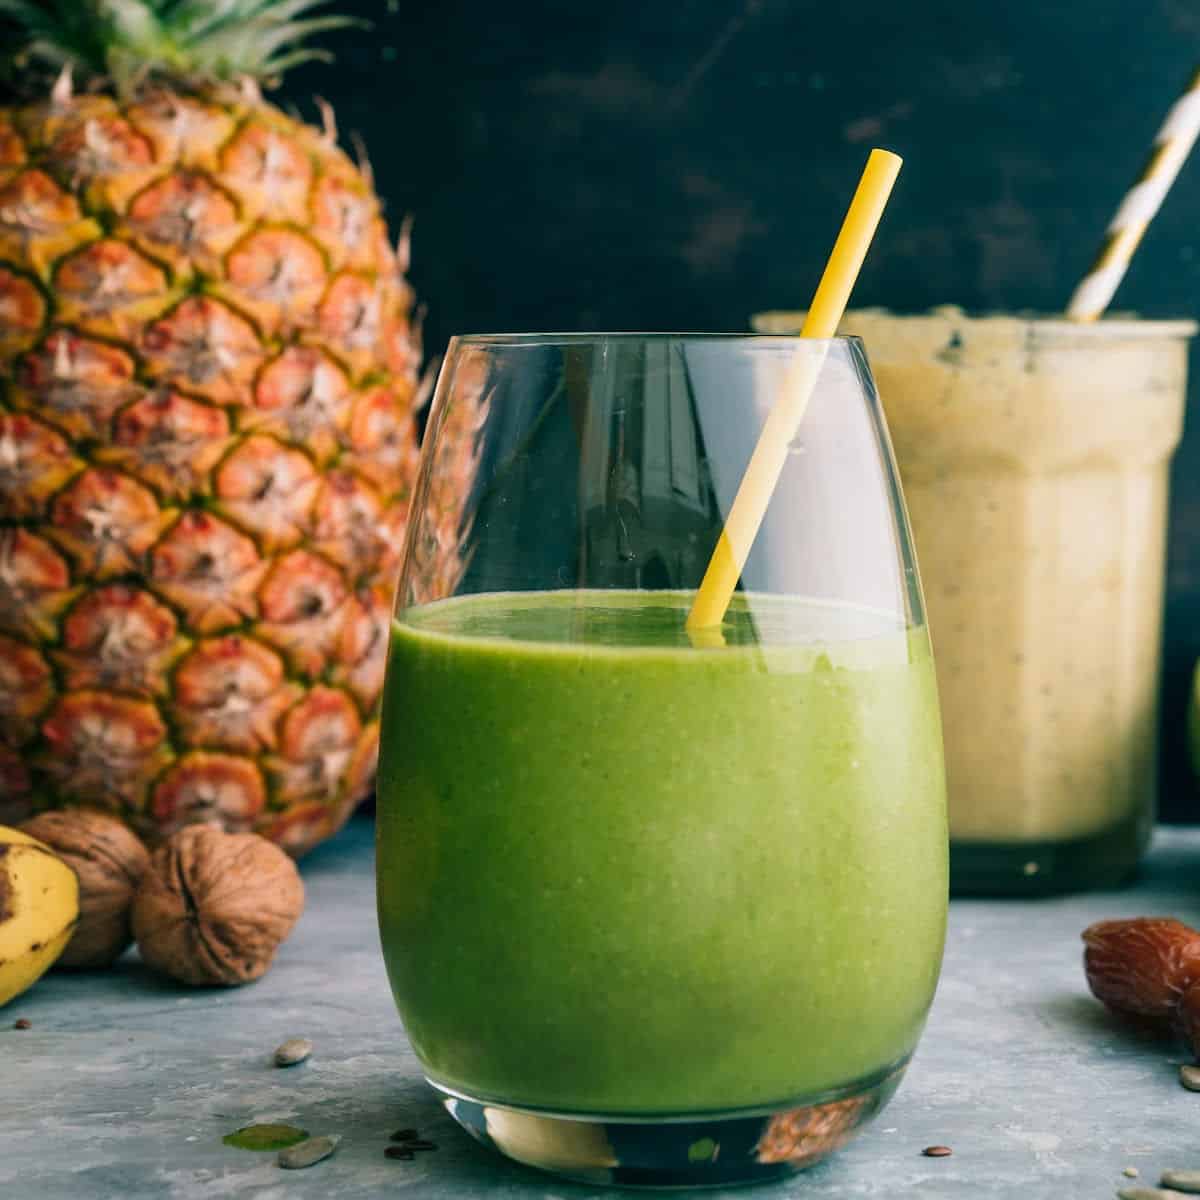 13 Best Blenders for Frozen Drinks and Smoothies